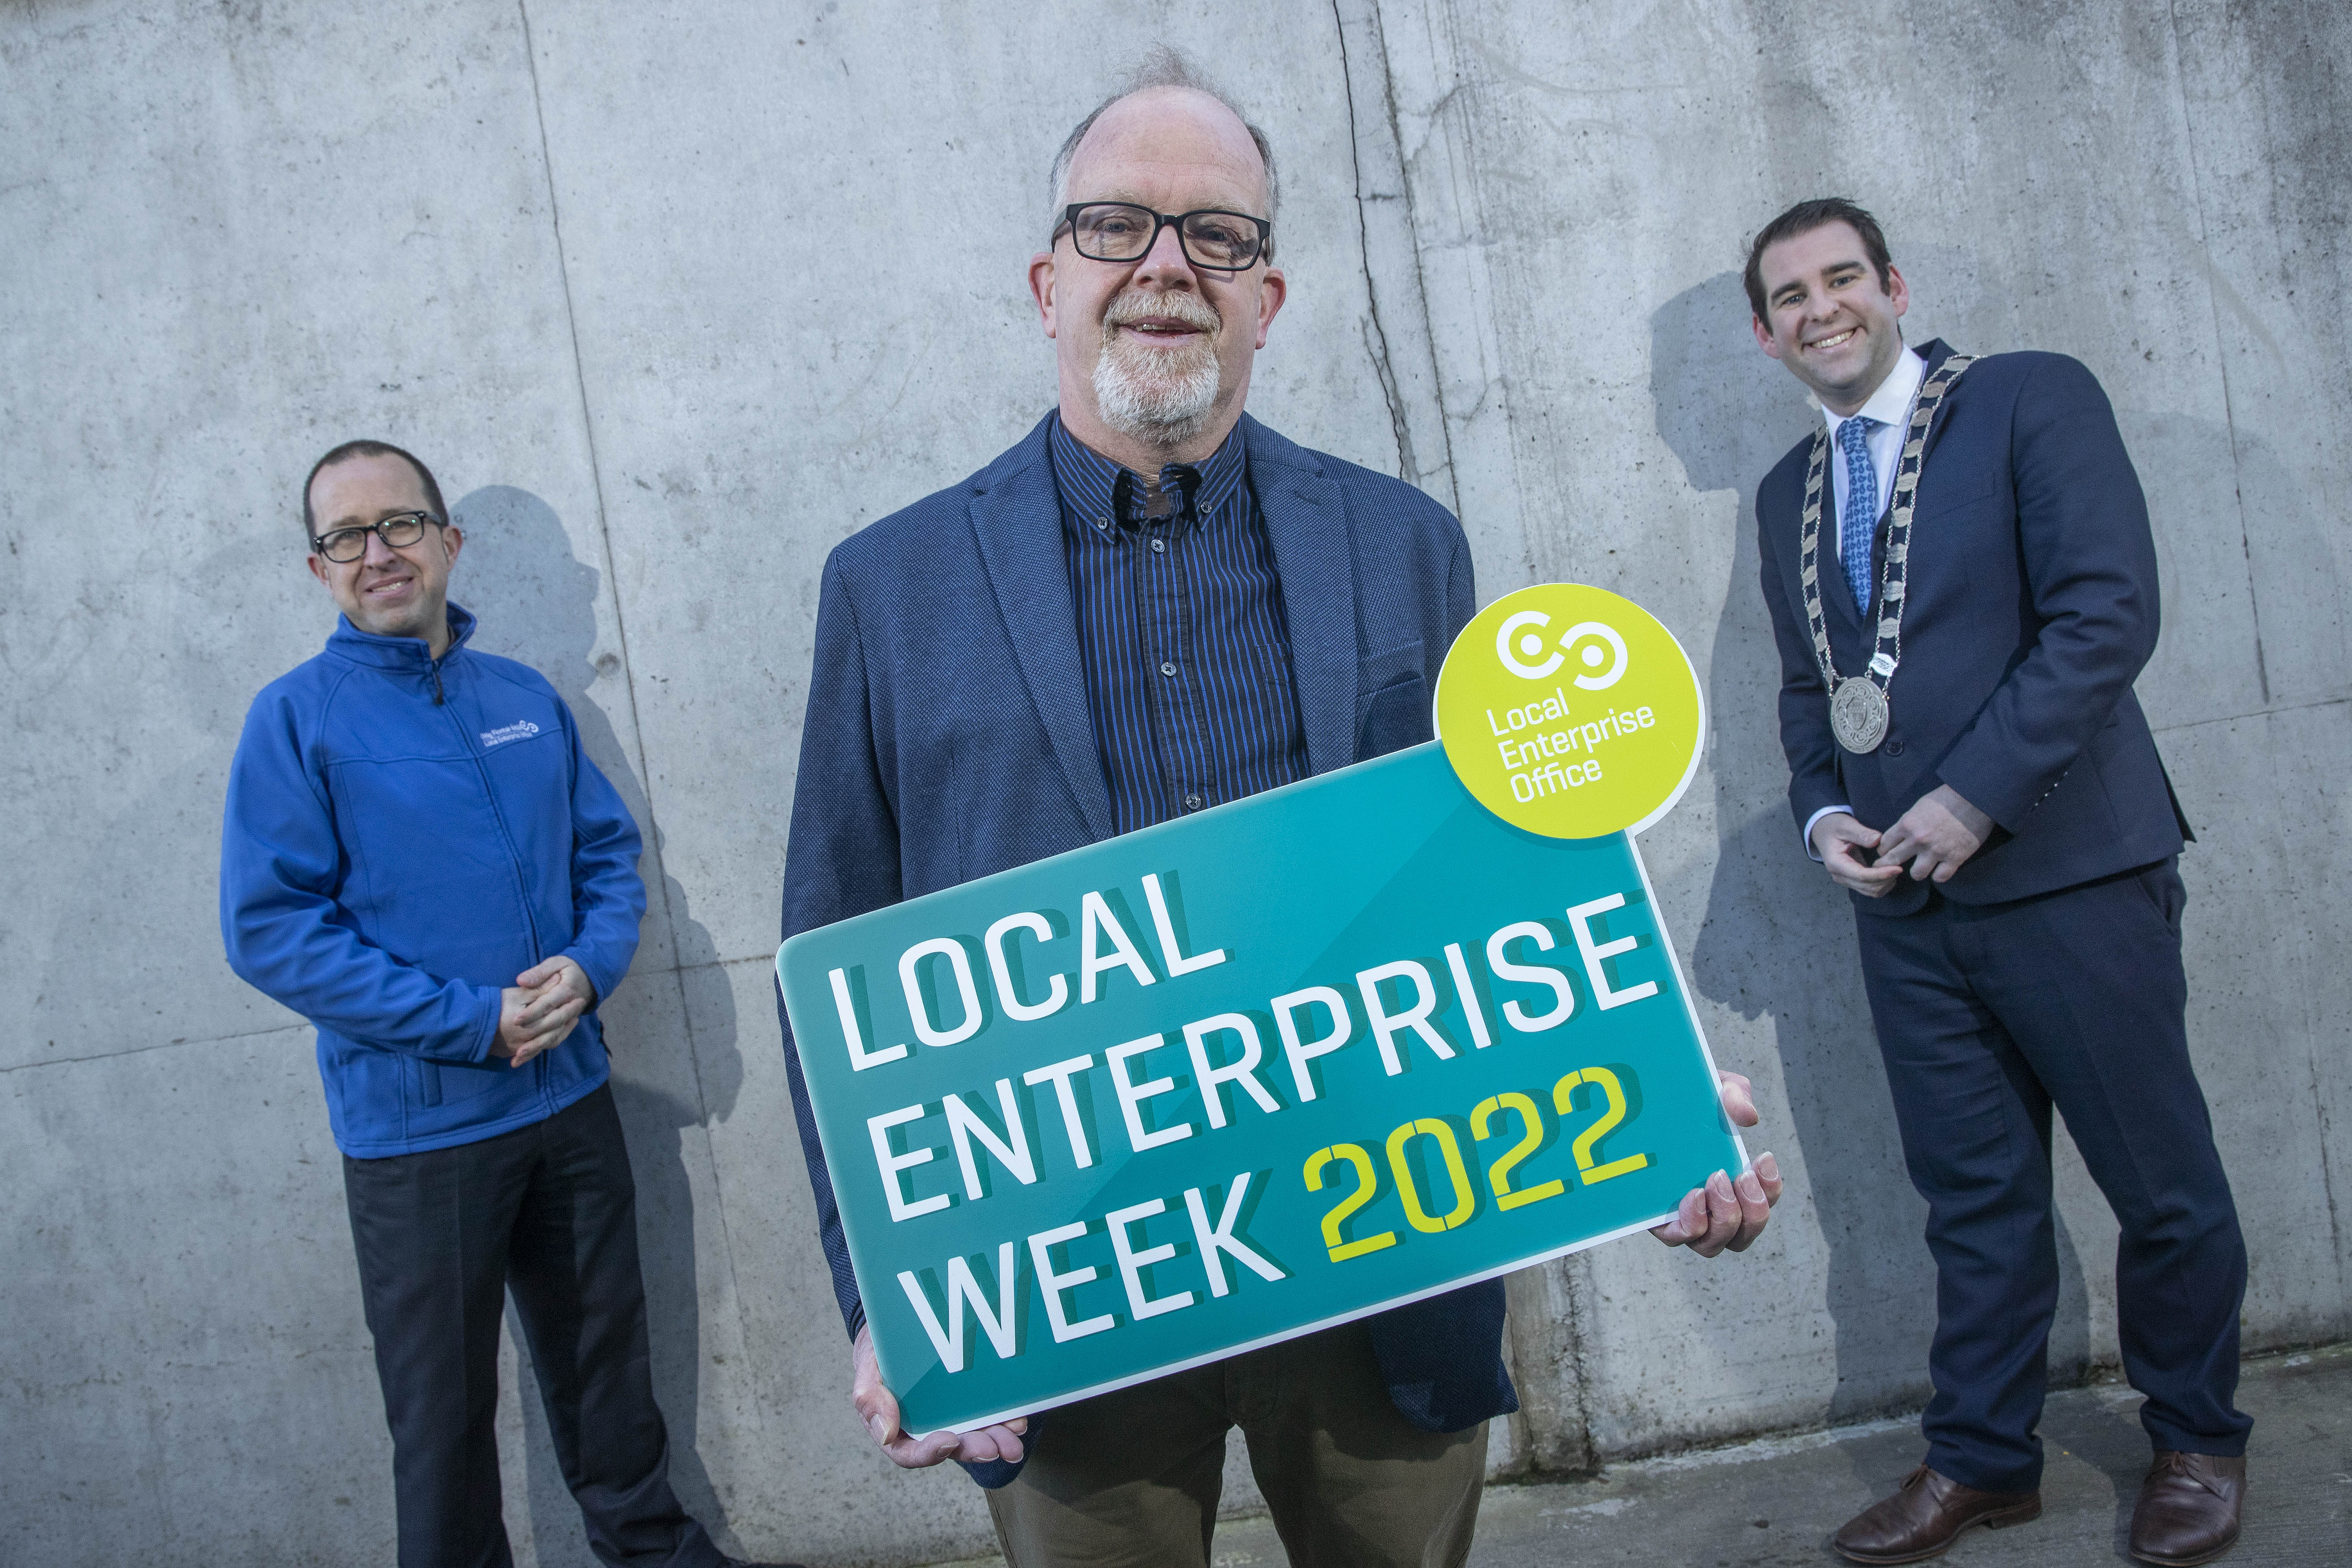  Enterprise Week event to focus on Local SME procurement opportunities 